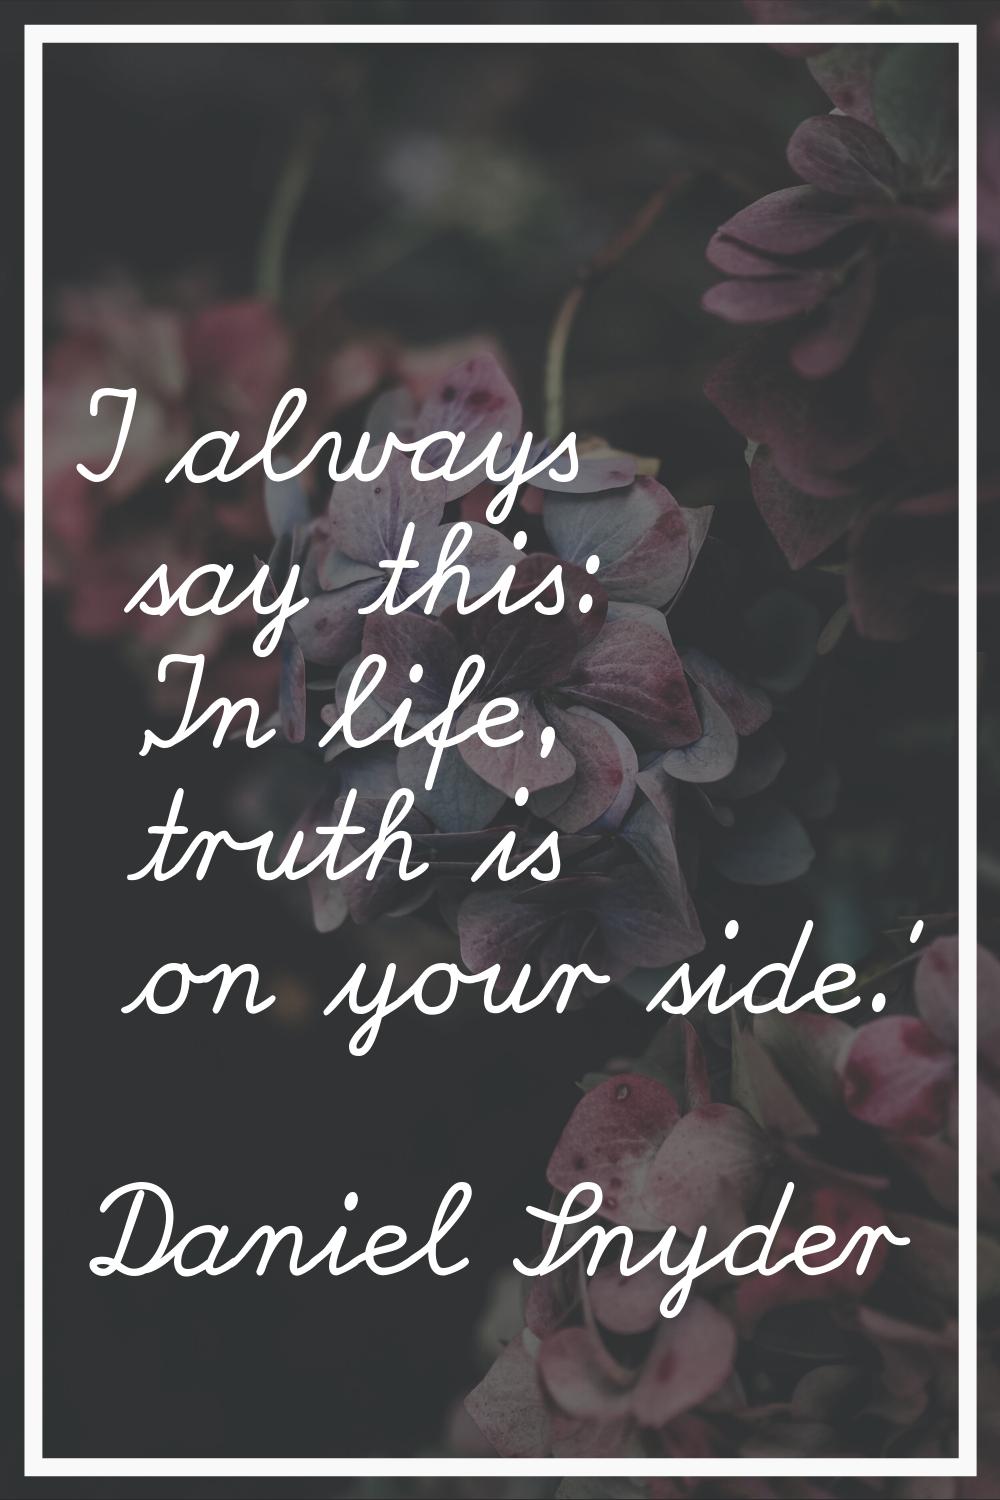 I always say this: 'In life, truth is on your side.'